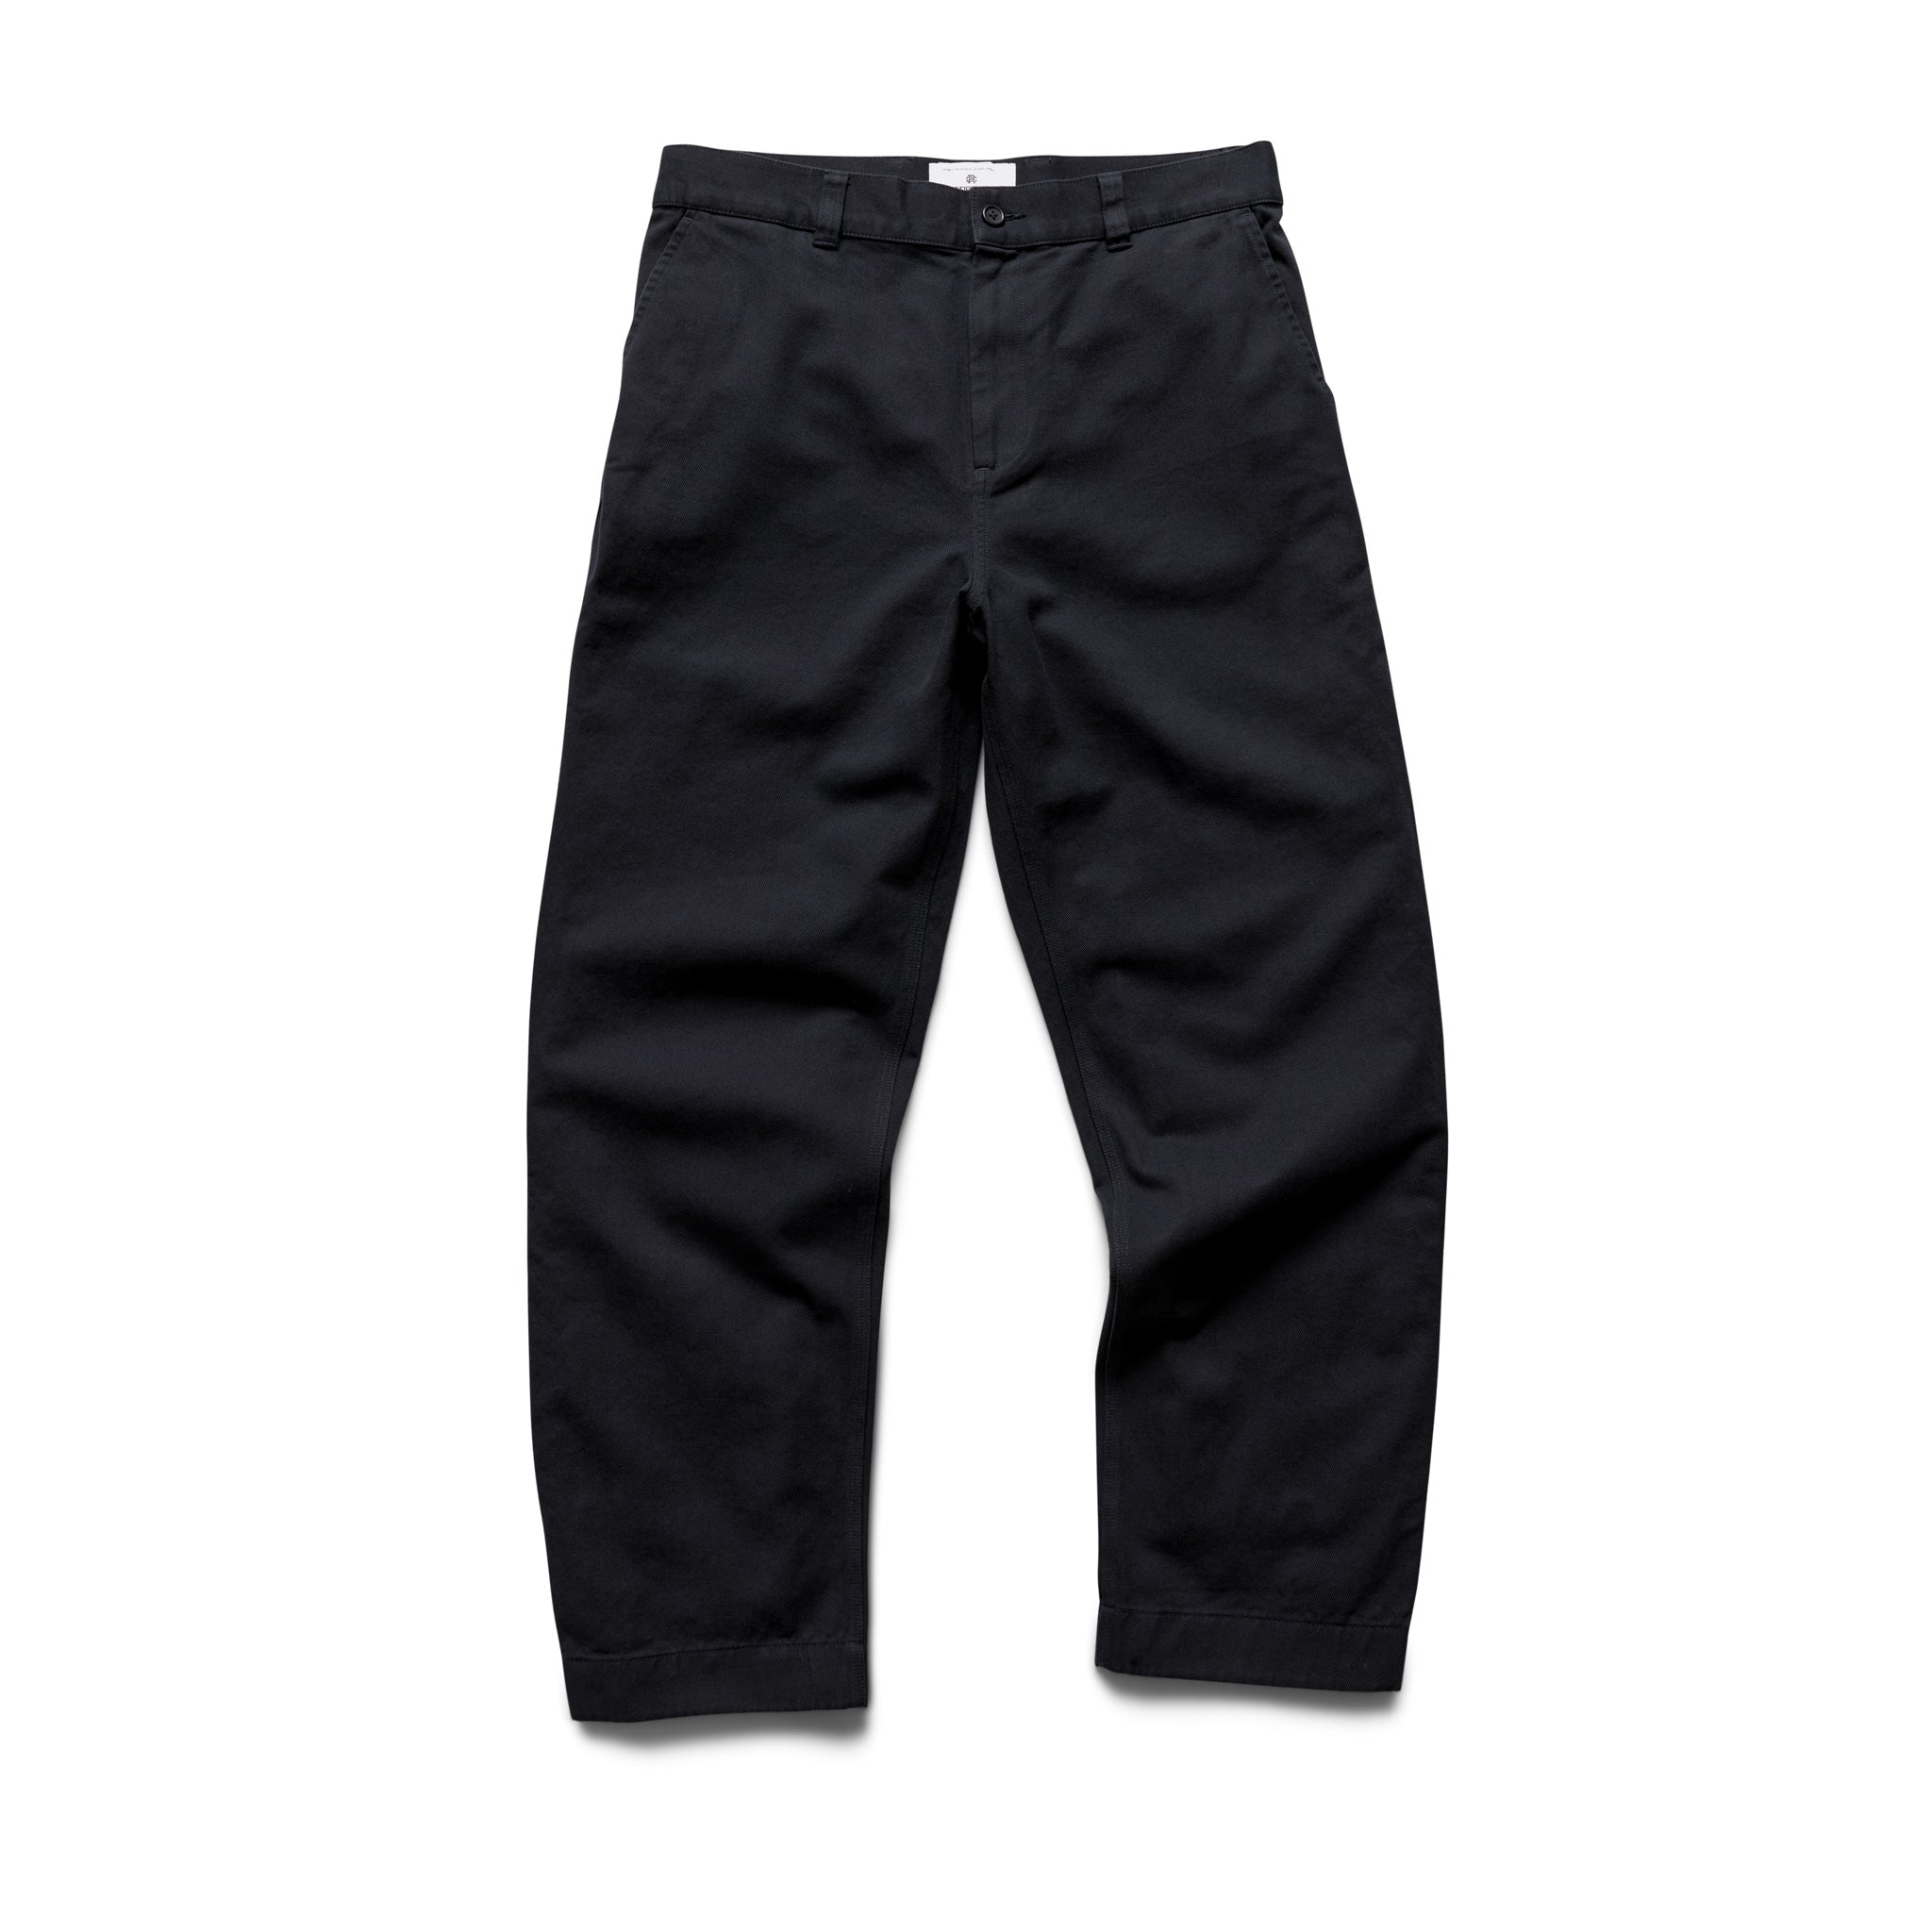 Cotton Chino Ivy Pant | Reigning Champ